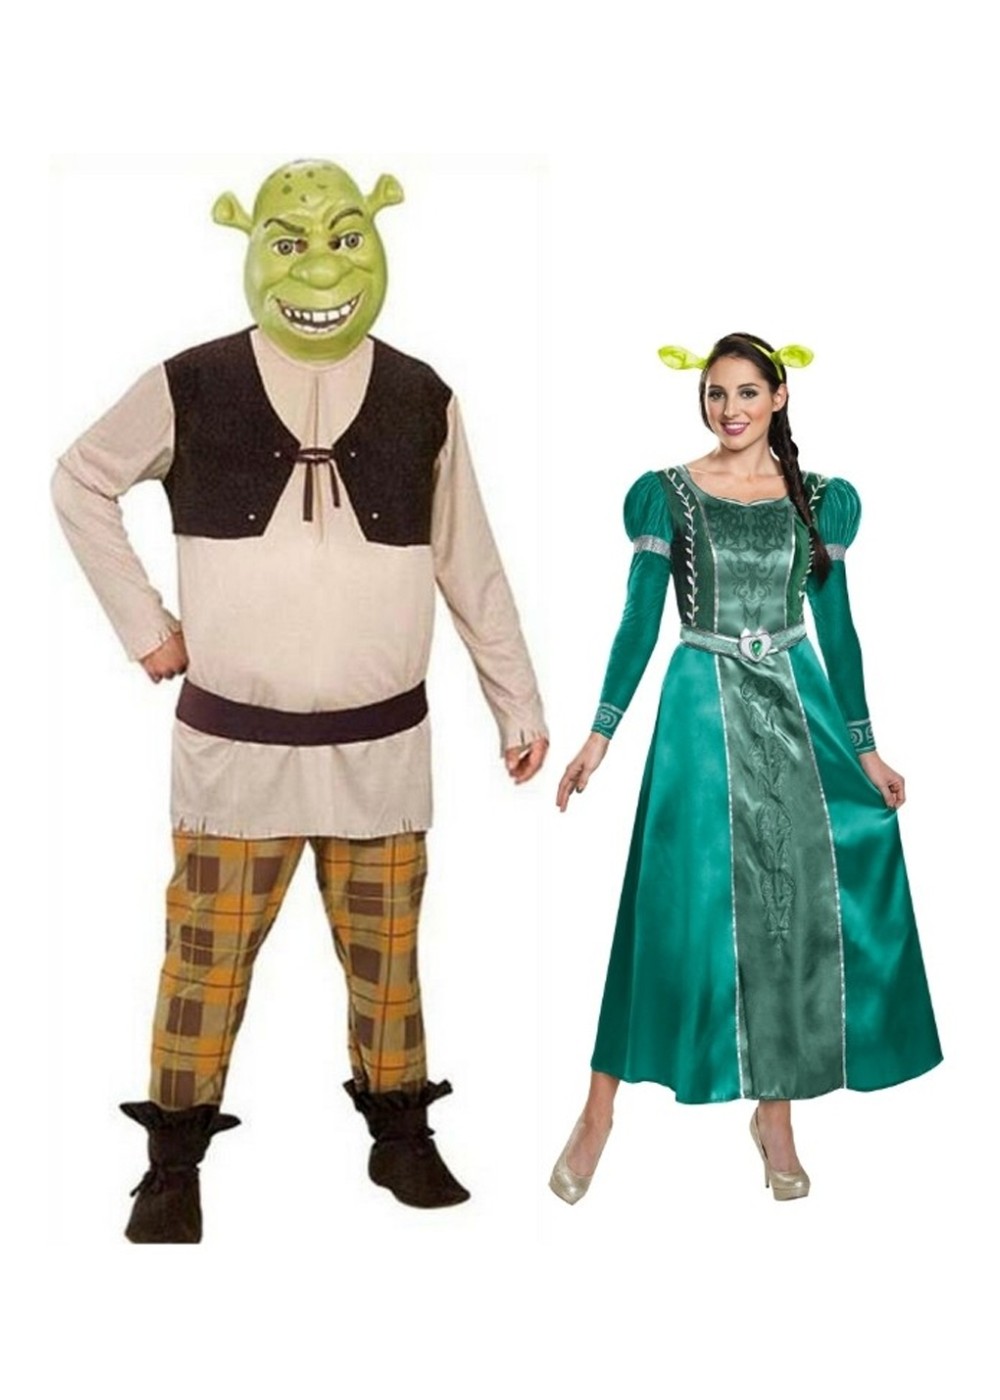 Shrek and Fiona Couples Costume - Couples Costume